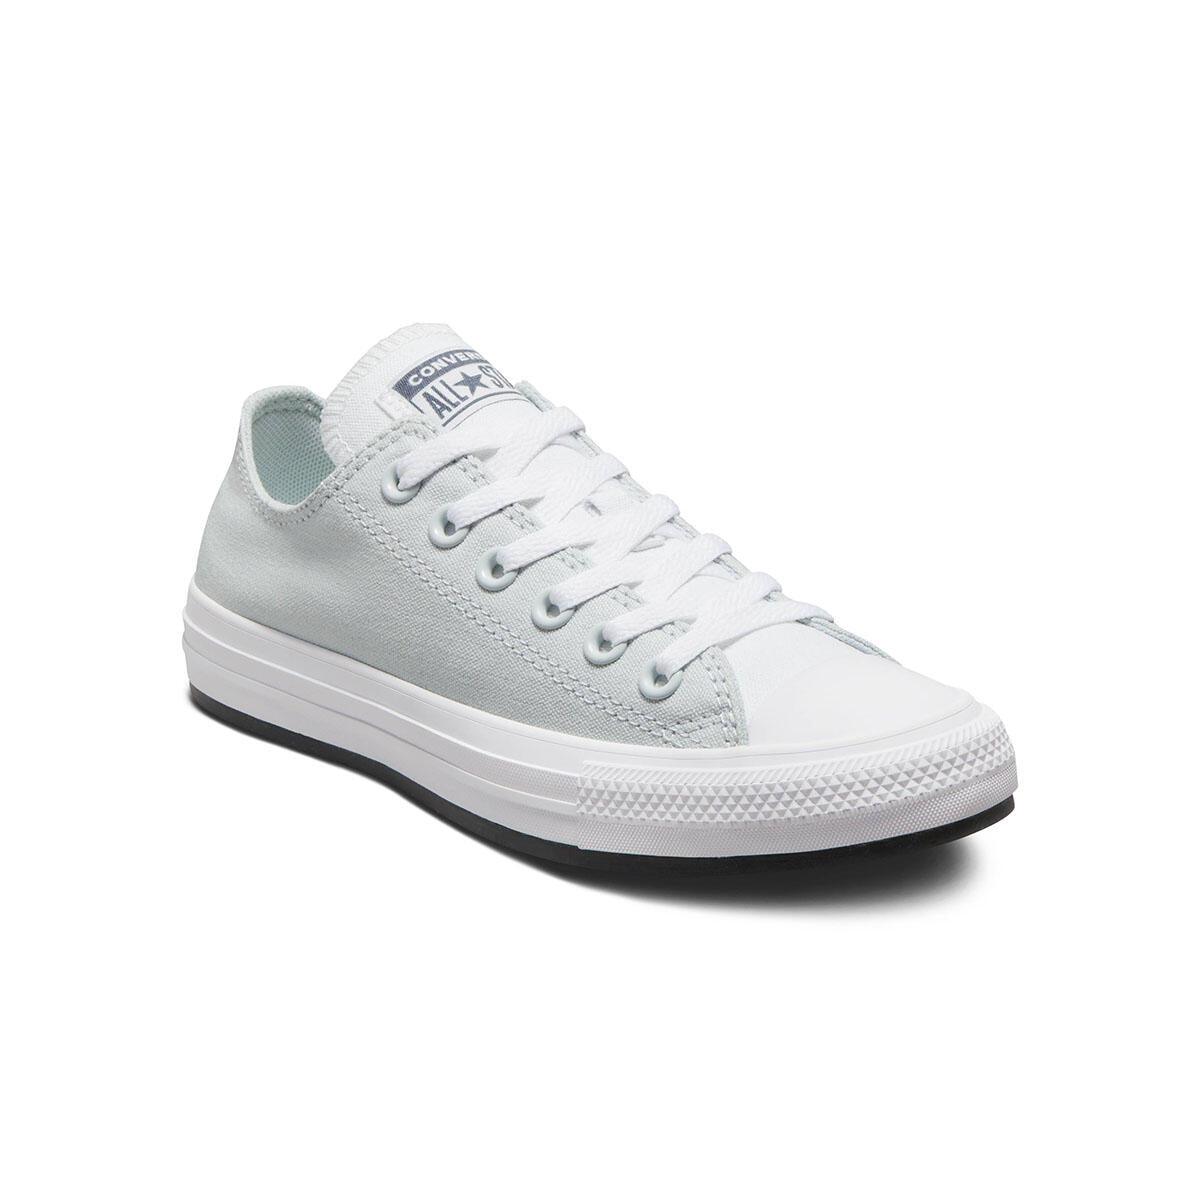 CT-H37 (Converse chuck taylor marbled low ghosted/aqua mist/cyber grey) 62395650 CONVERSE